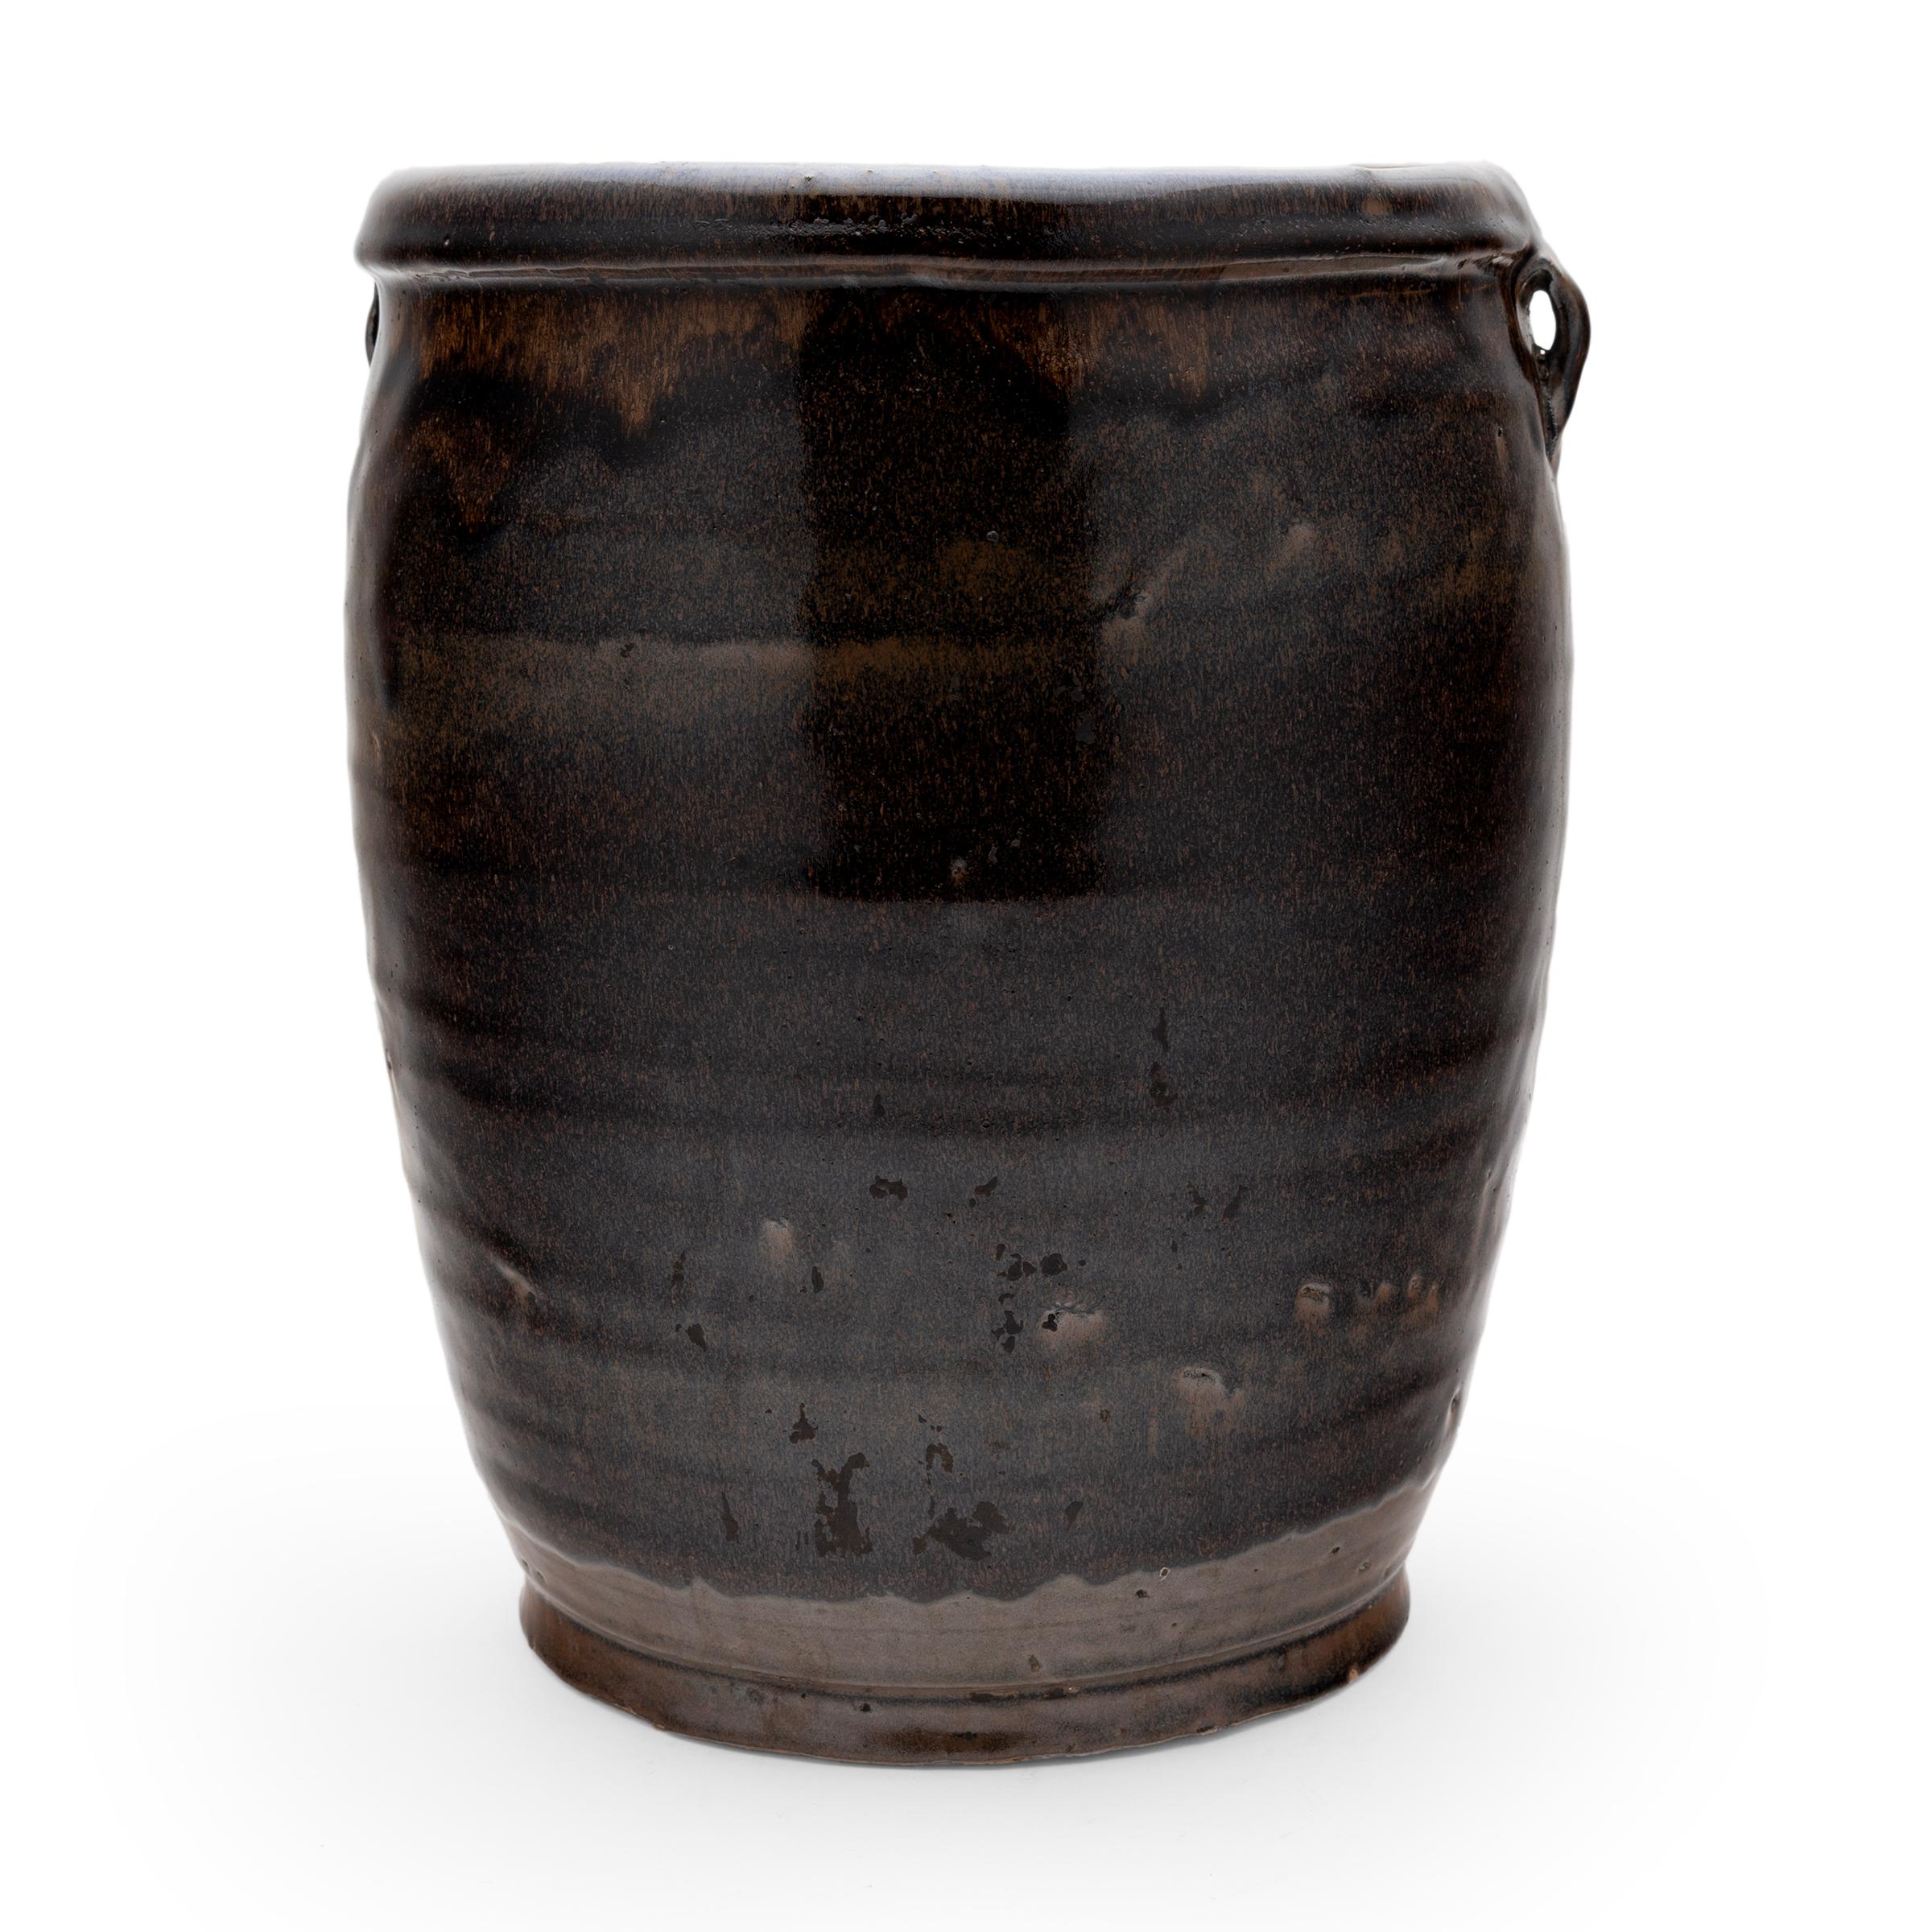 A speckled, dark brown glaze coats the gently tapered form of this late 20th century kitchen jar. As evidenced by the glazed interior, the jar was once used daily in a Qing-dynasty kitchen for fermenting foods and condiments. The wide-mouth jar